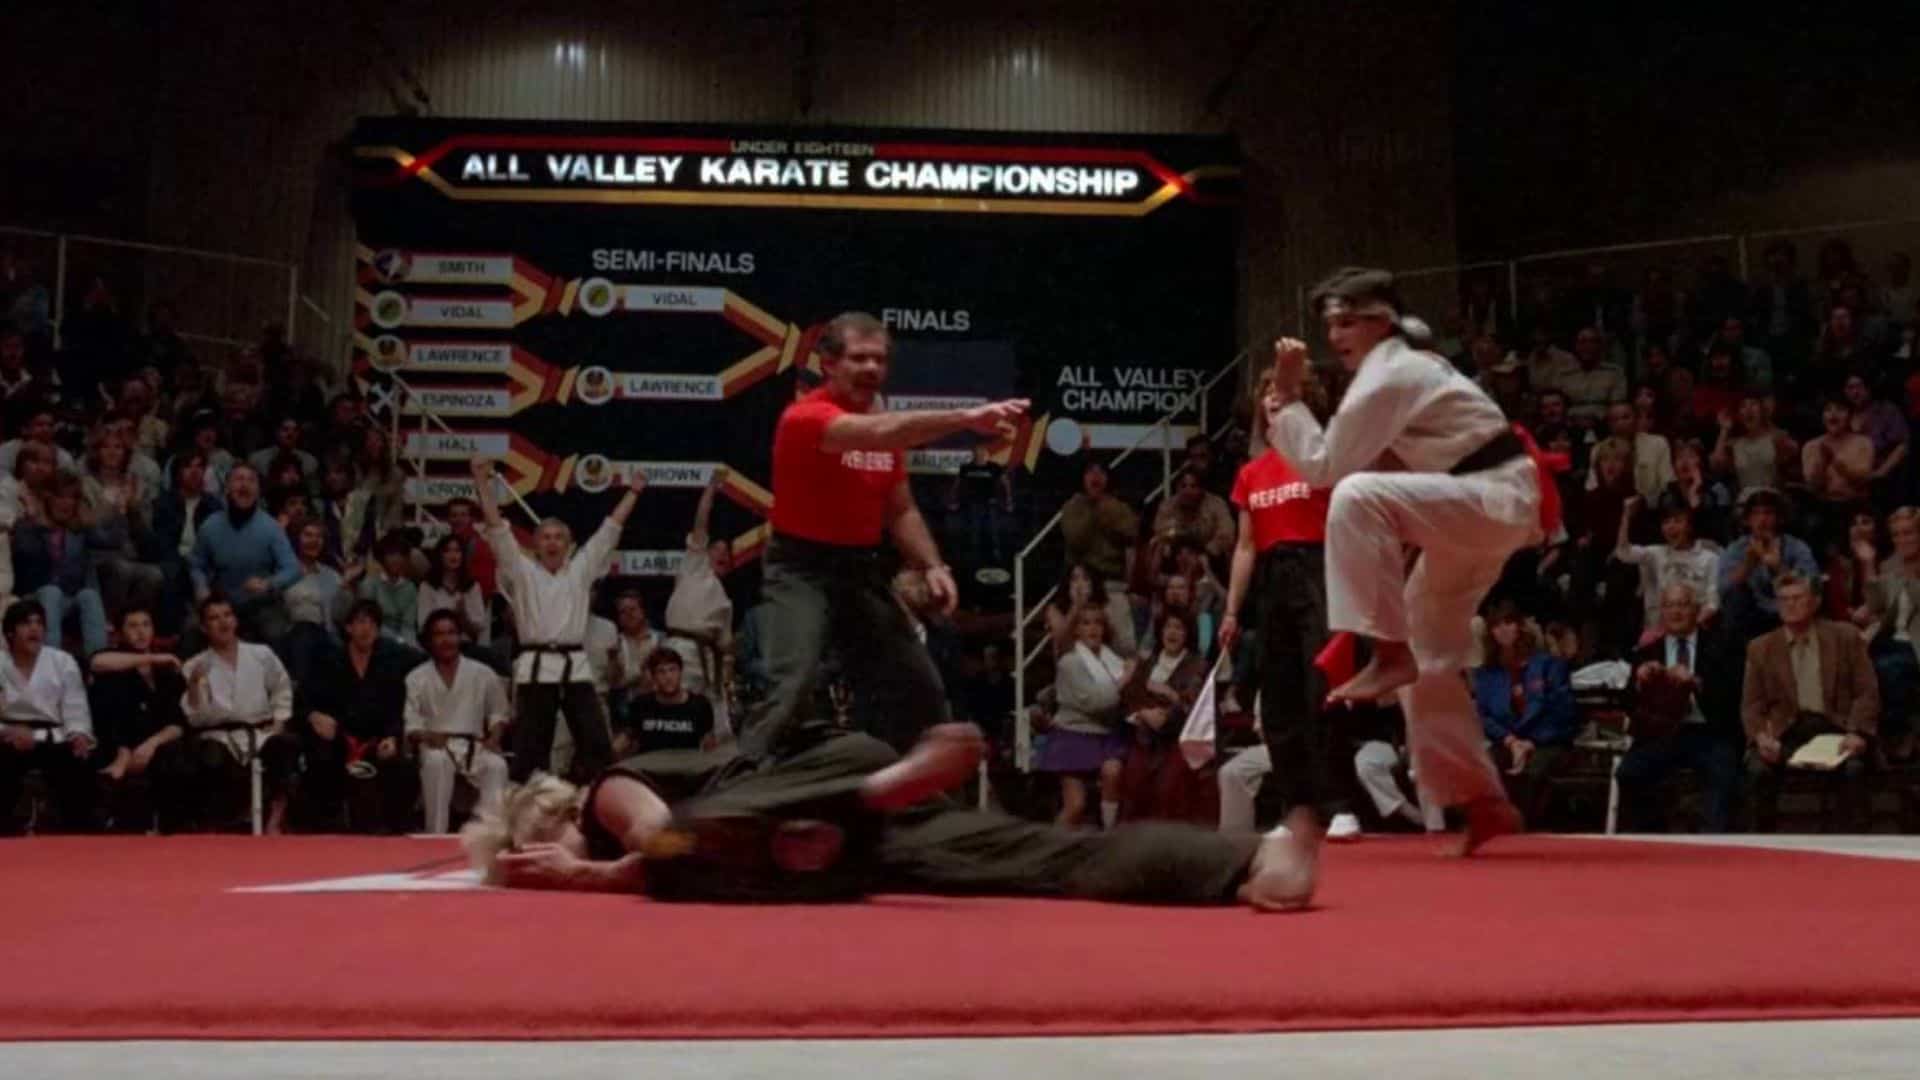 A man gets knocked on the ground in a karate match in this image from Sony Pictures.